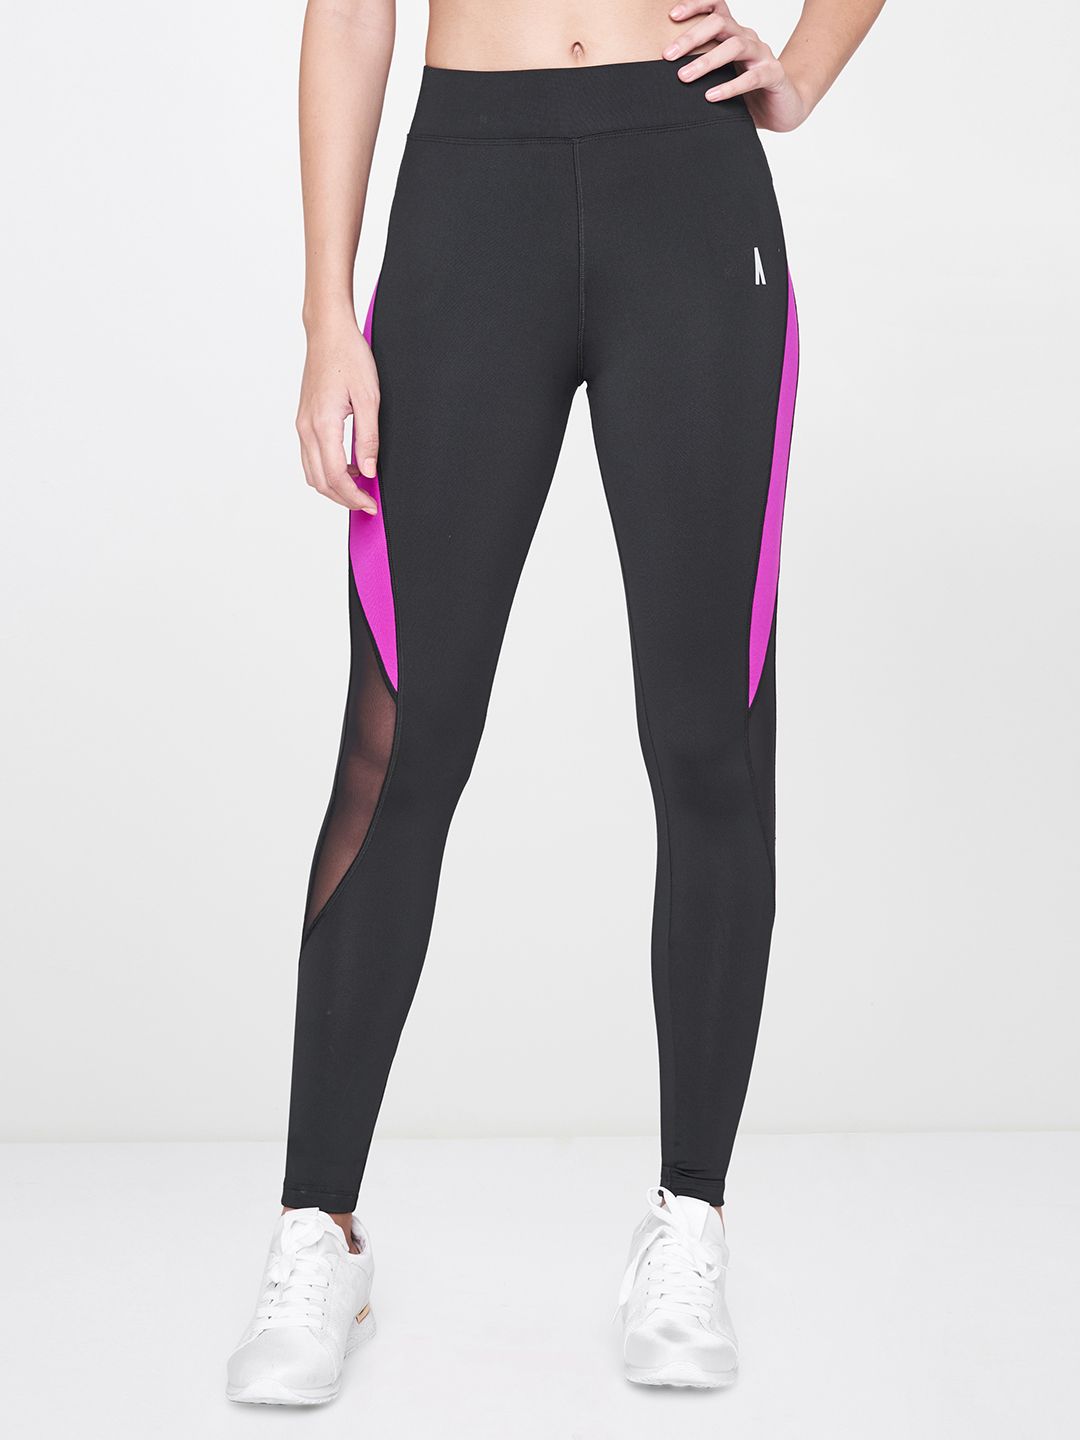 AND Women Black Solid Activewear Tights Price in India